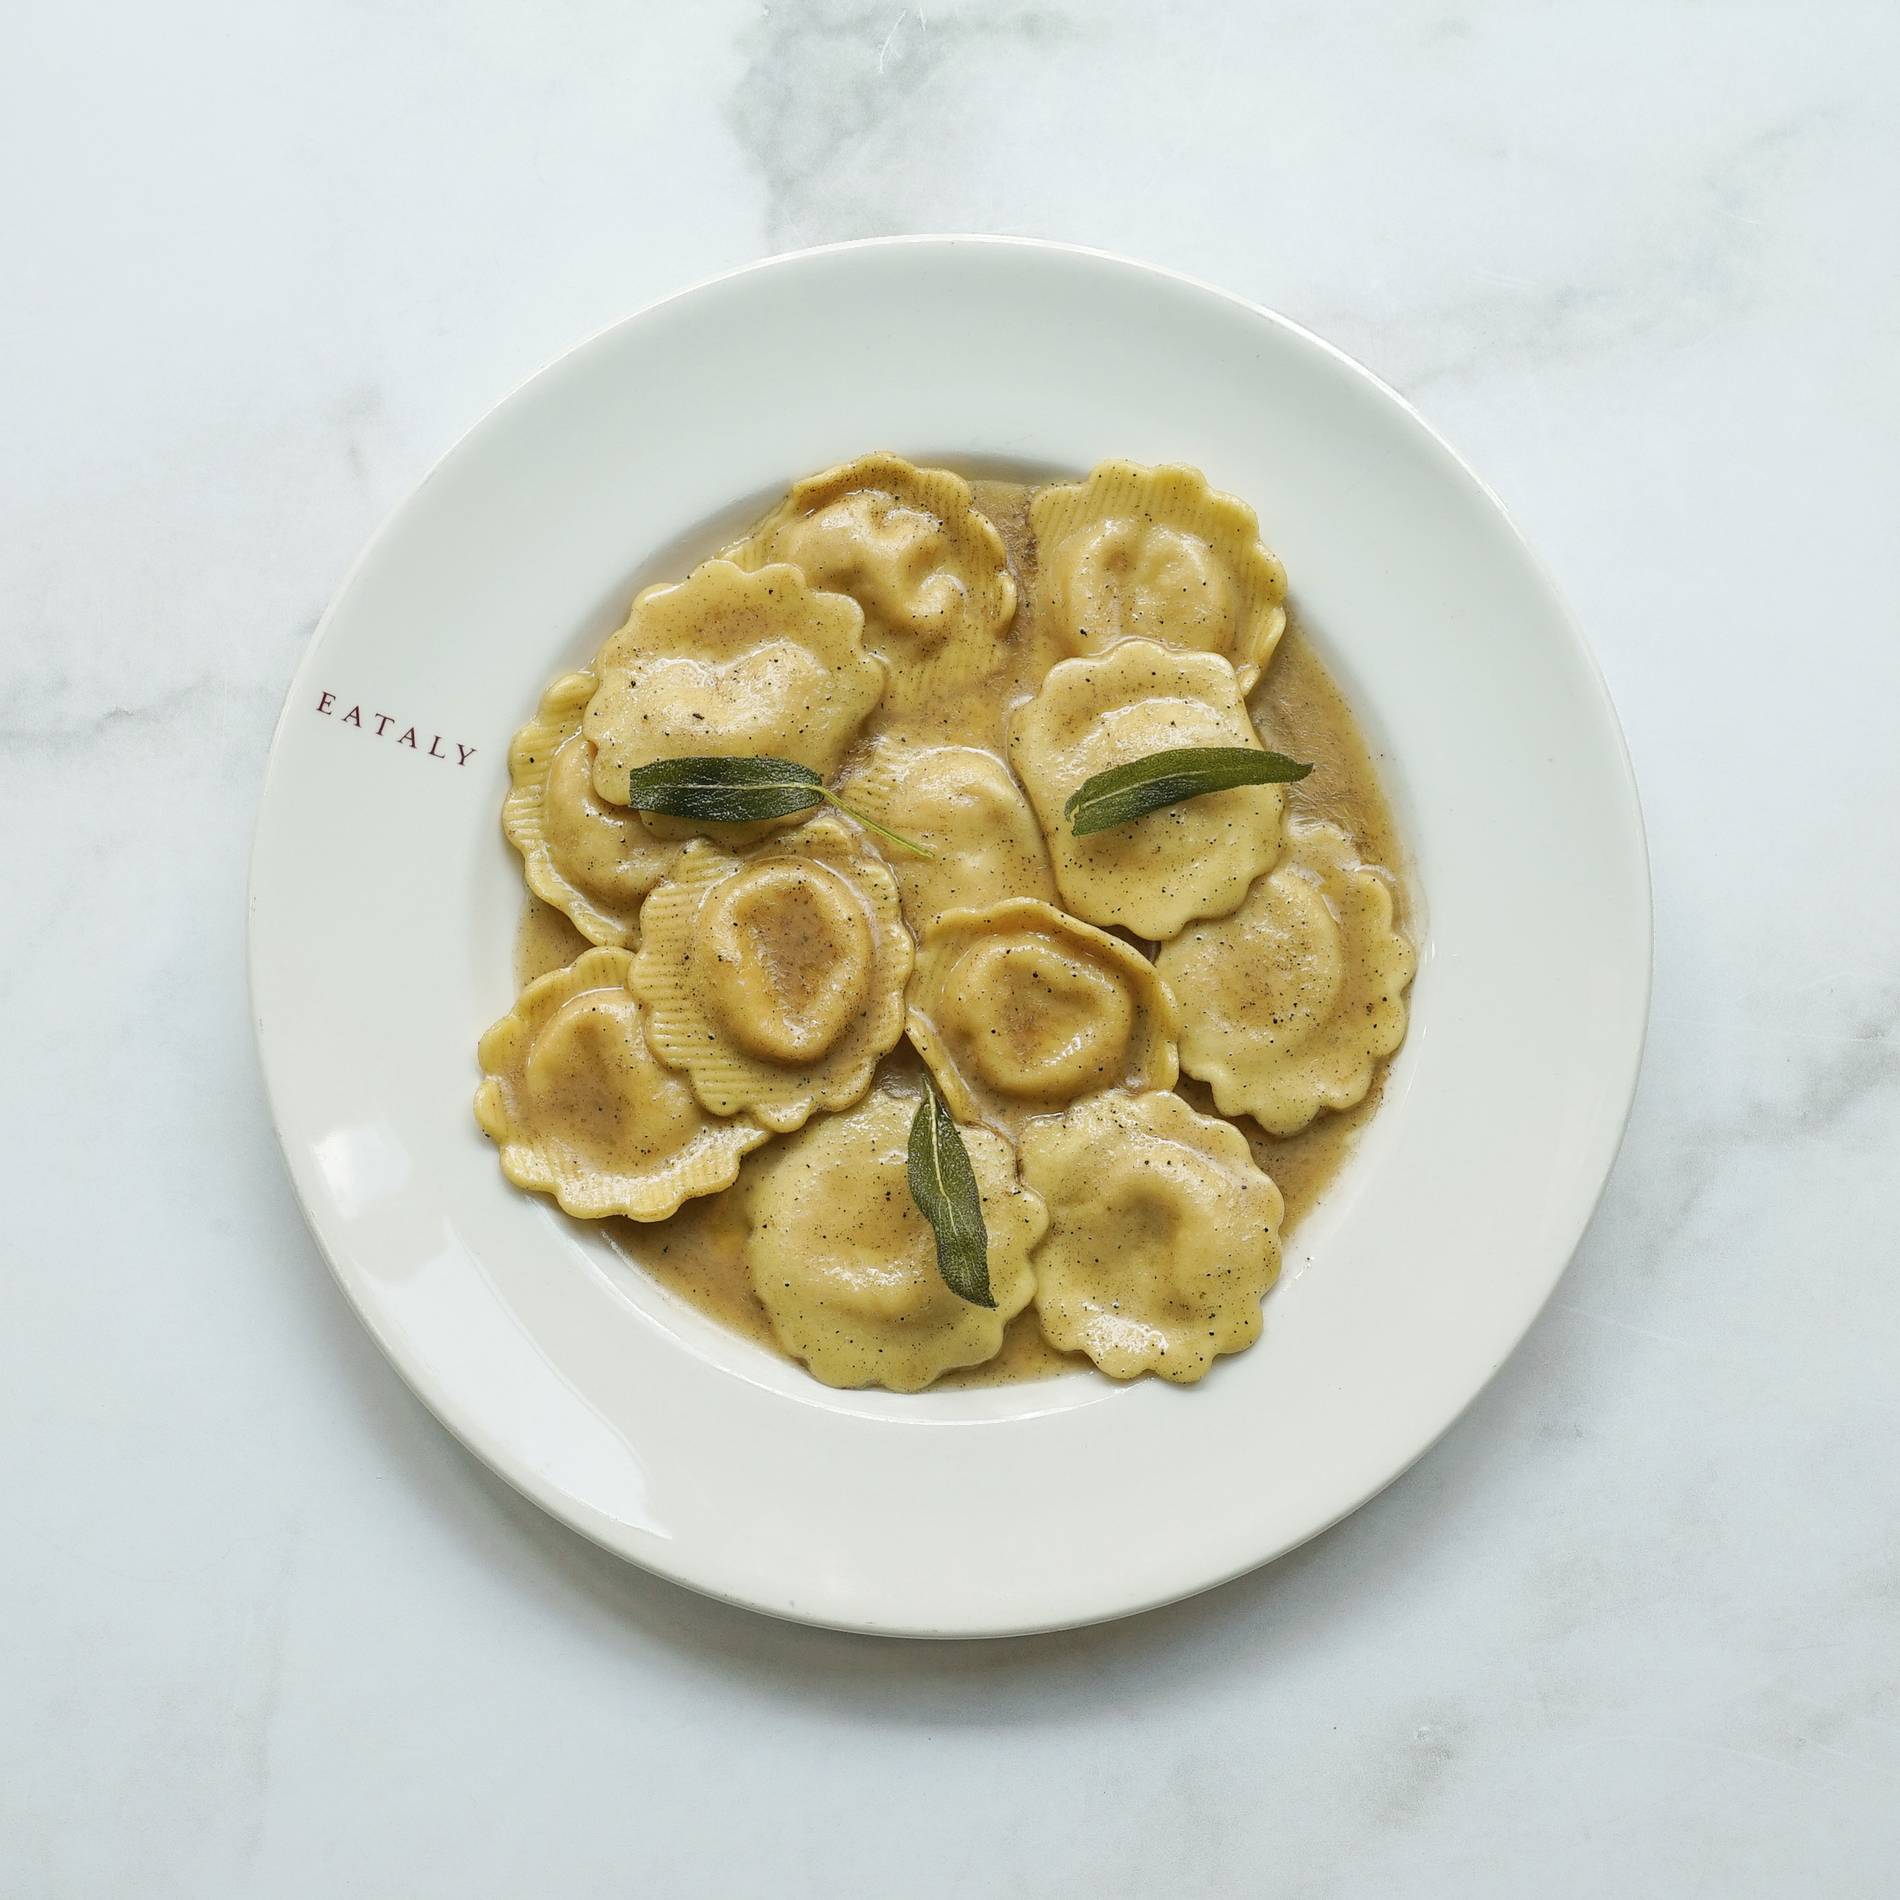 eataly's squash ravioli with brown butter and sage sauce